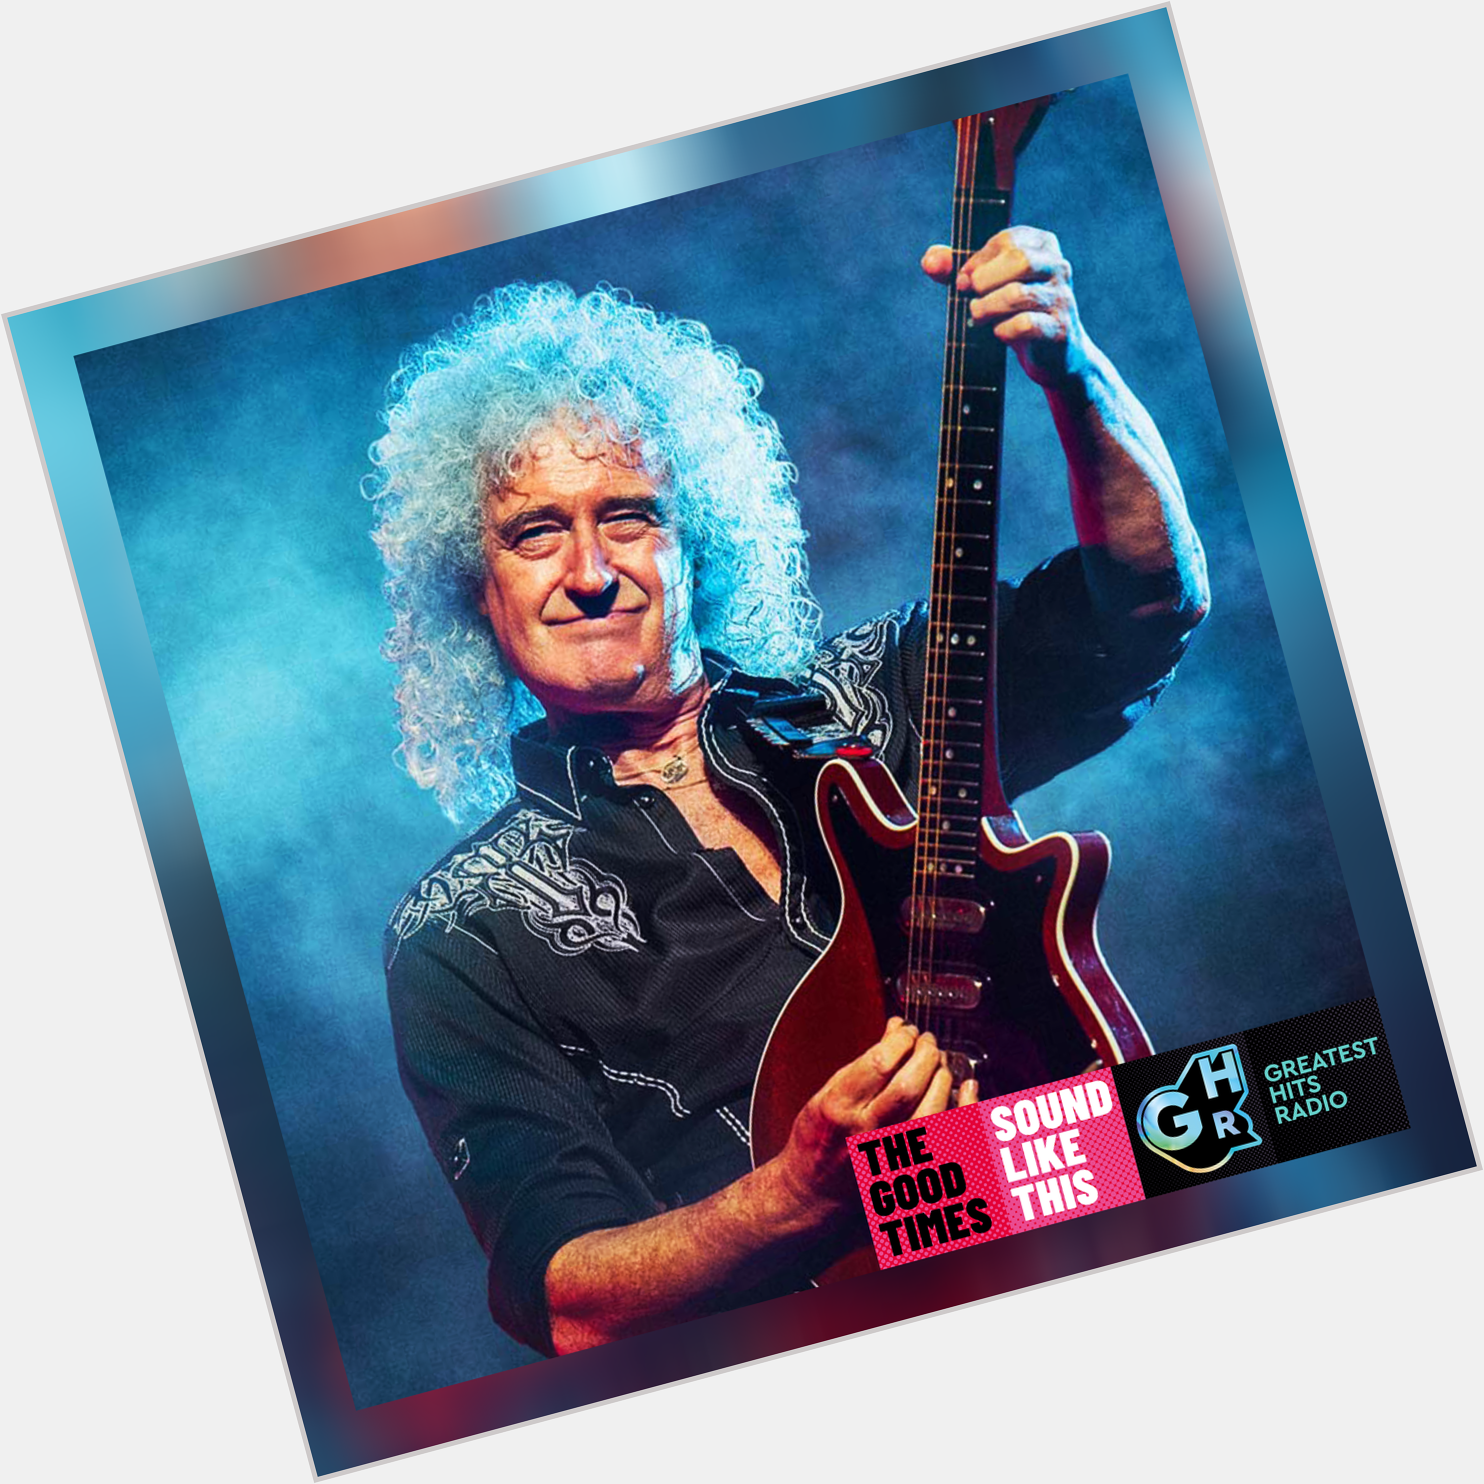 Happy birthday to Queen legend, Brian May! 